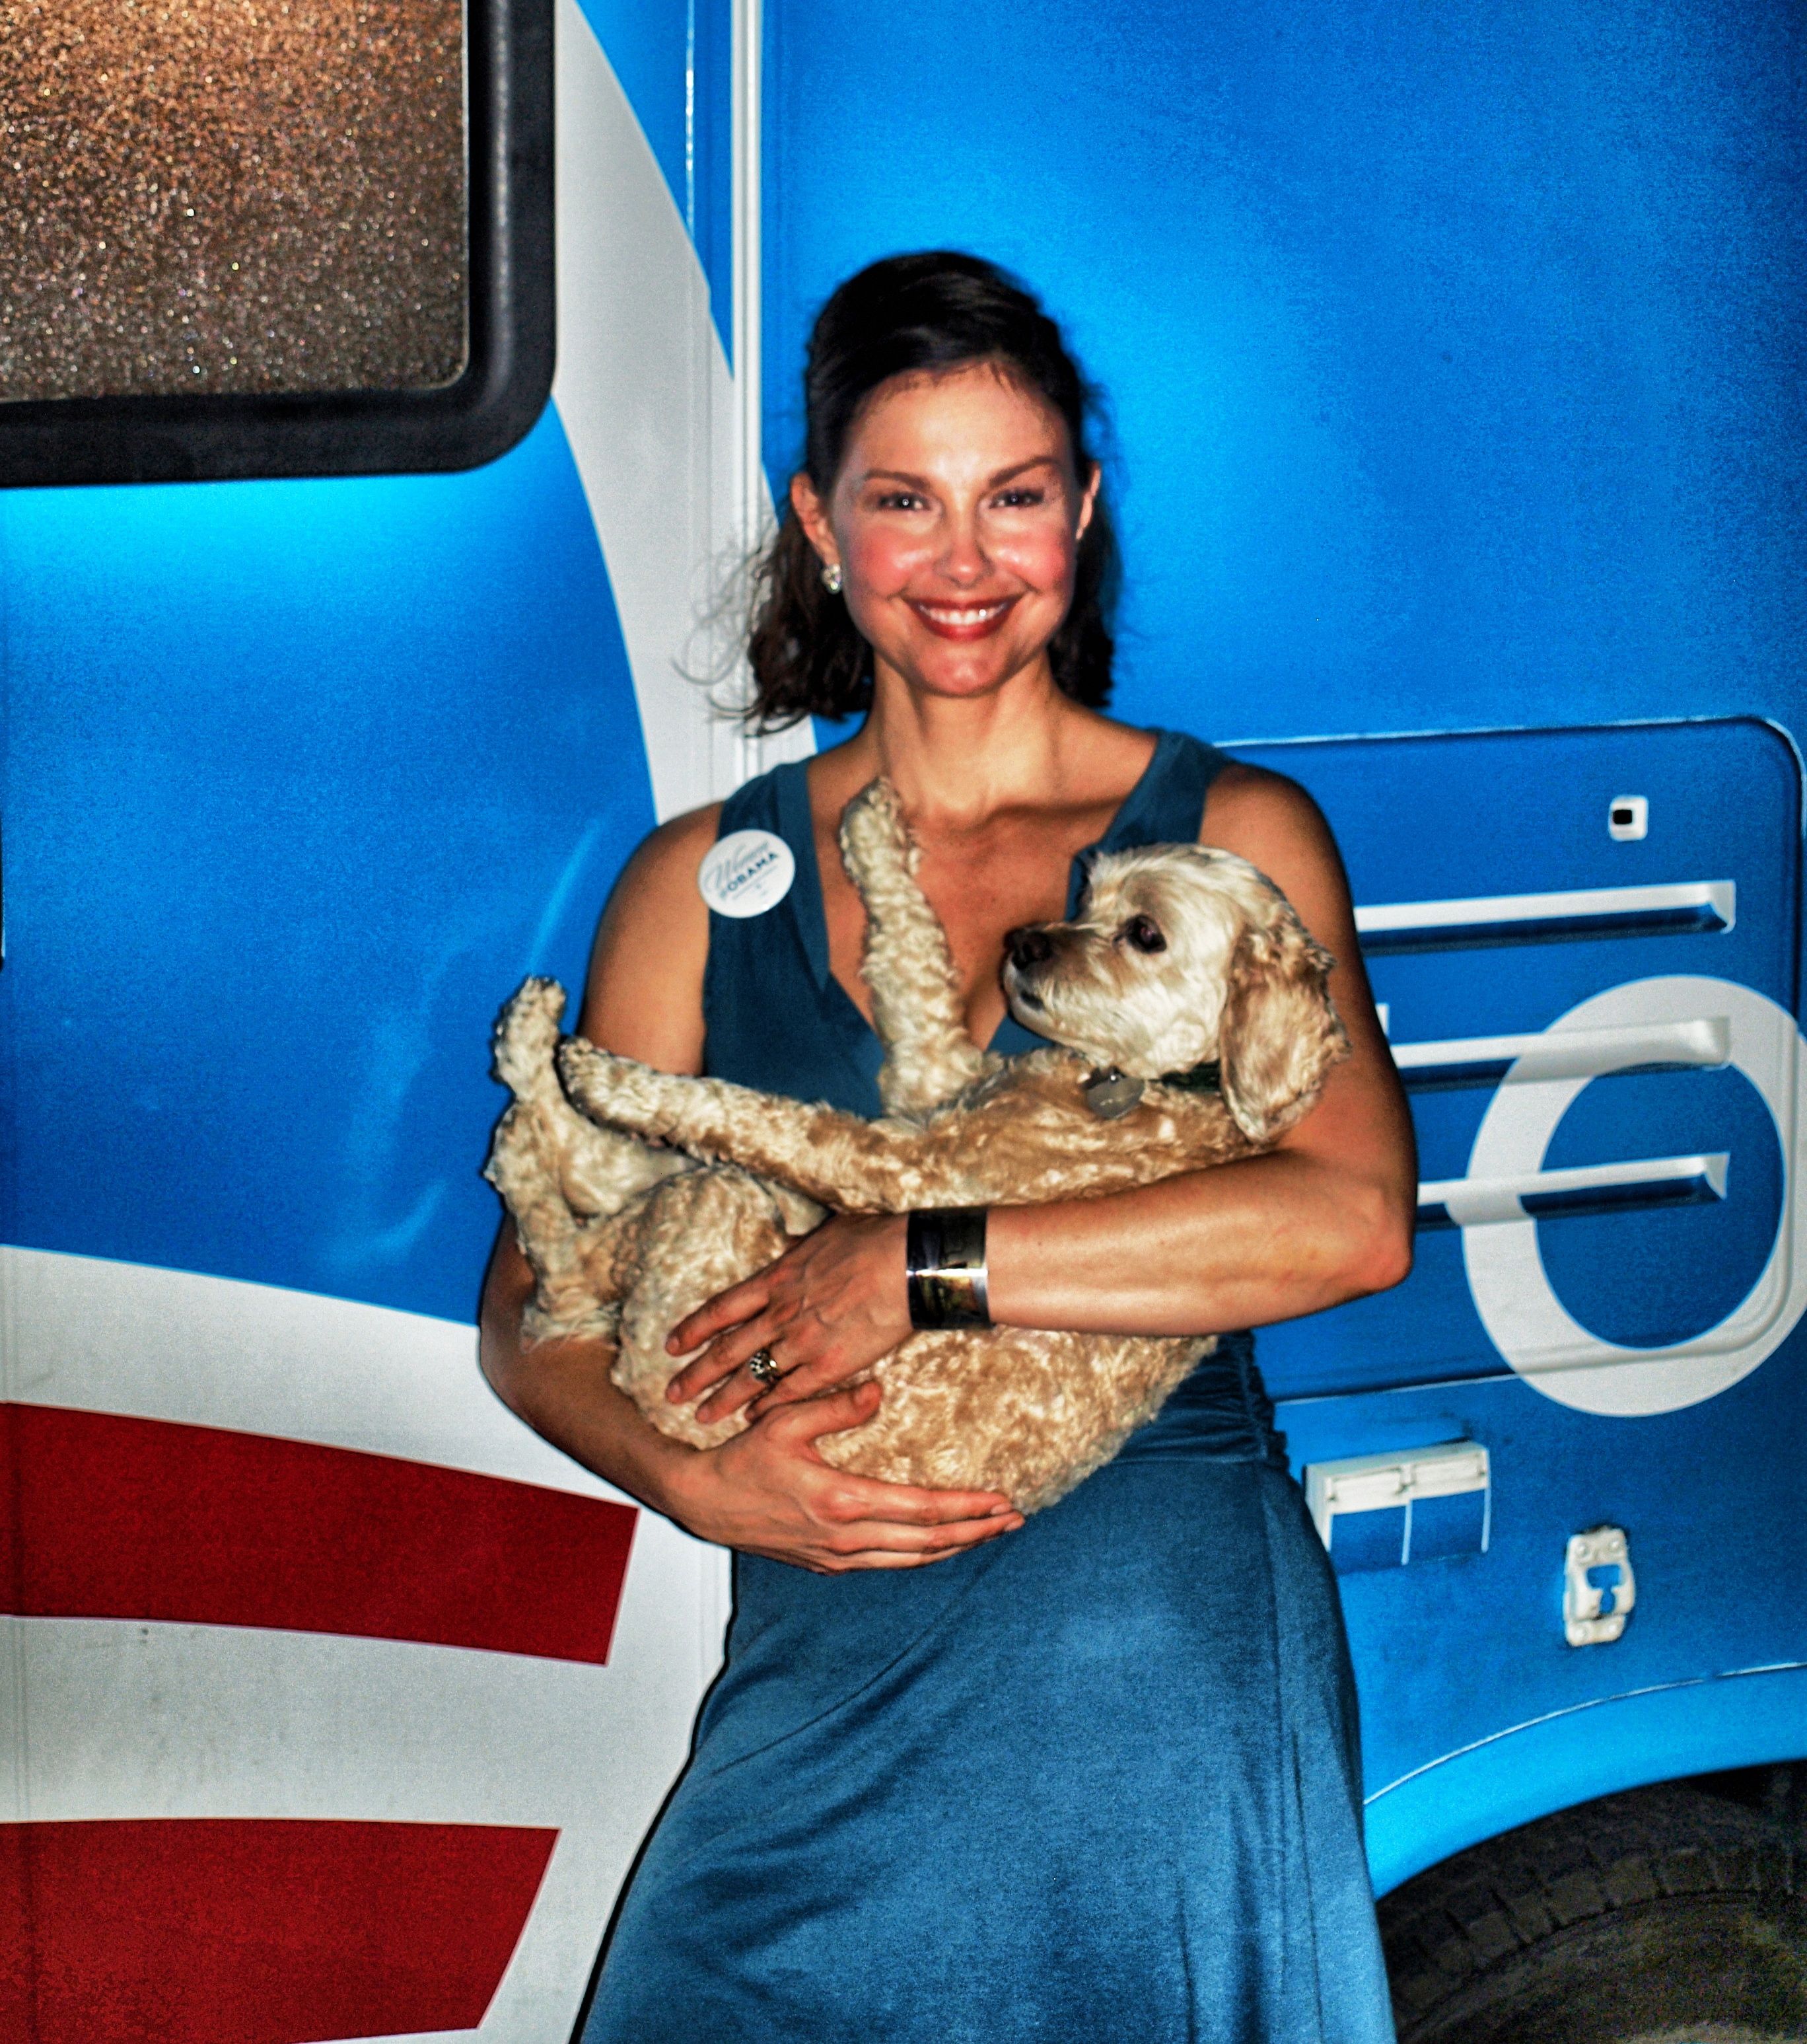 Ashley Judd standing in front of a bus while carrying her Cocker Spaniel